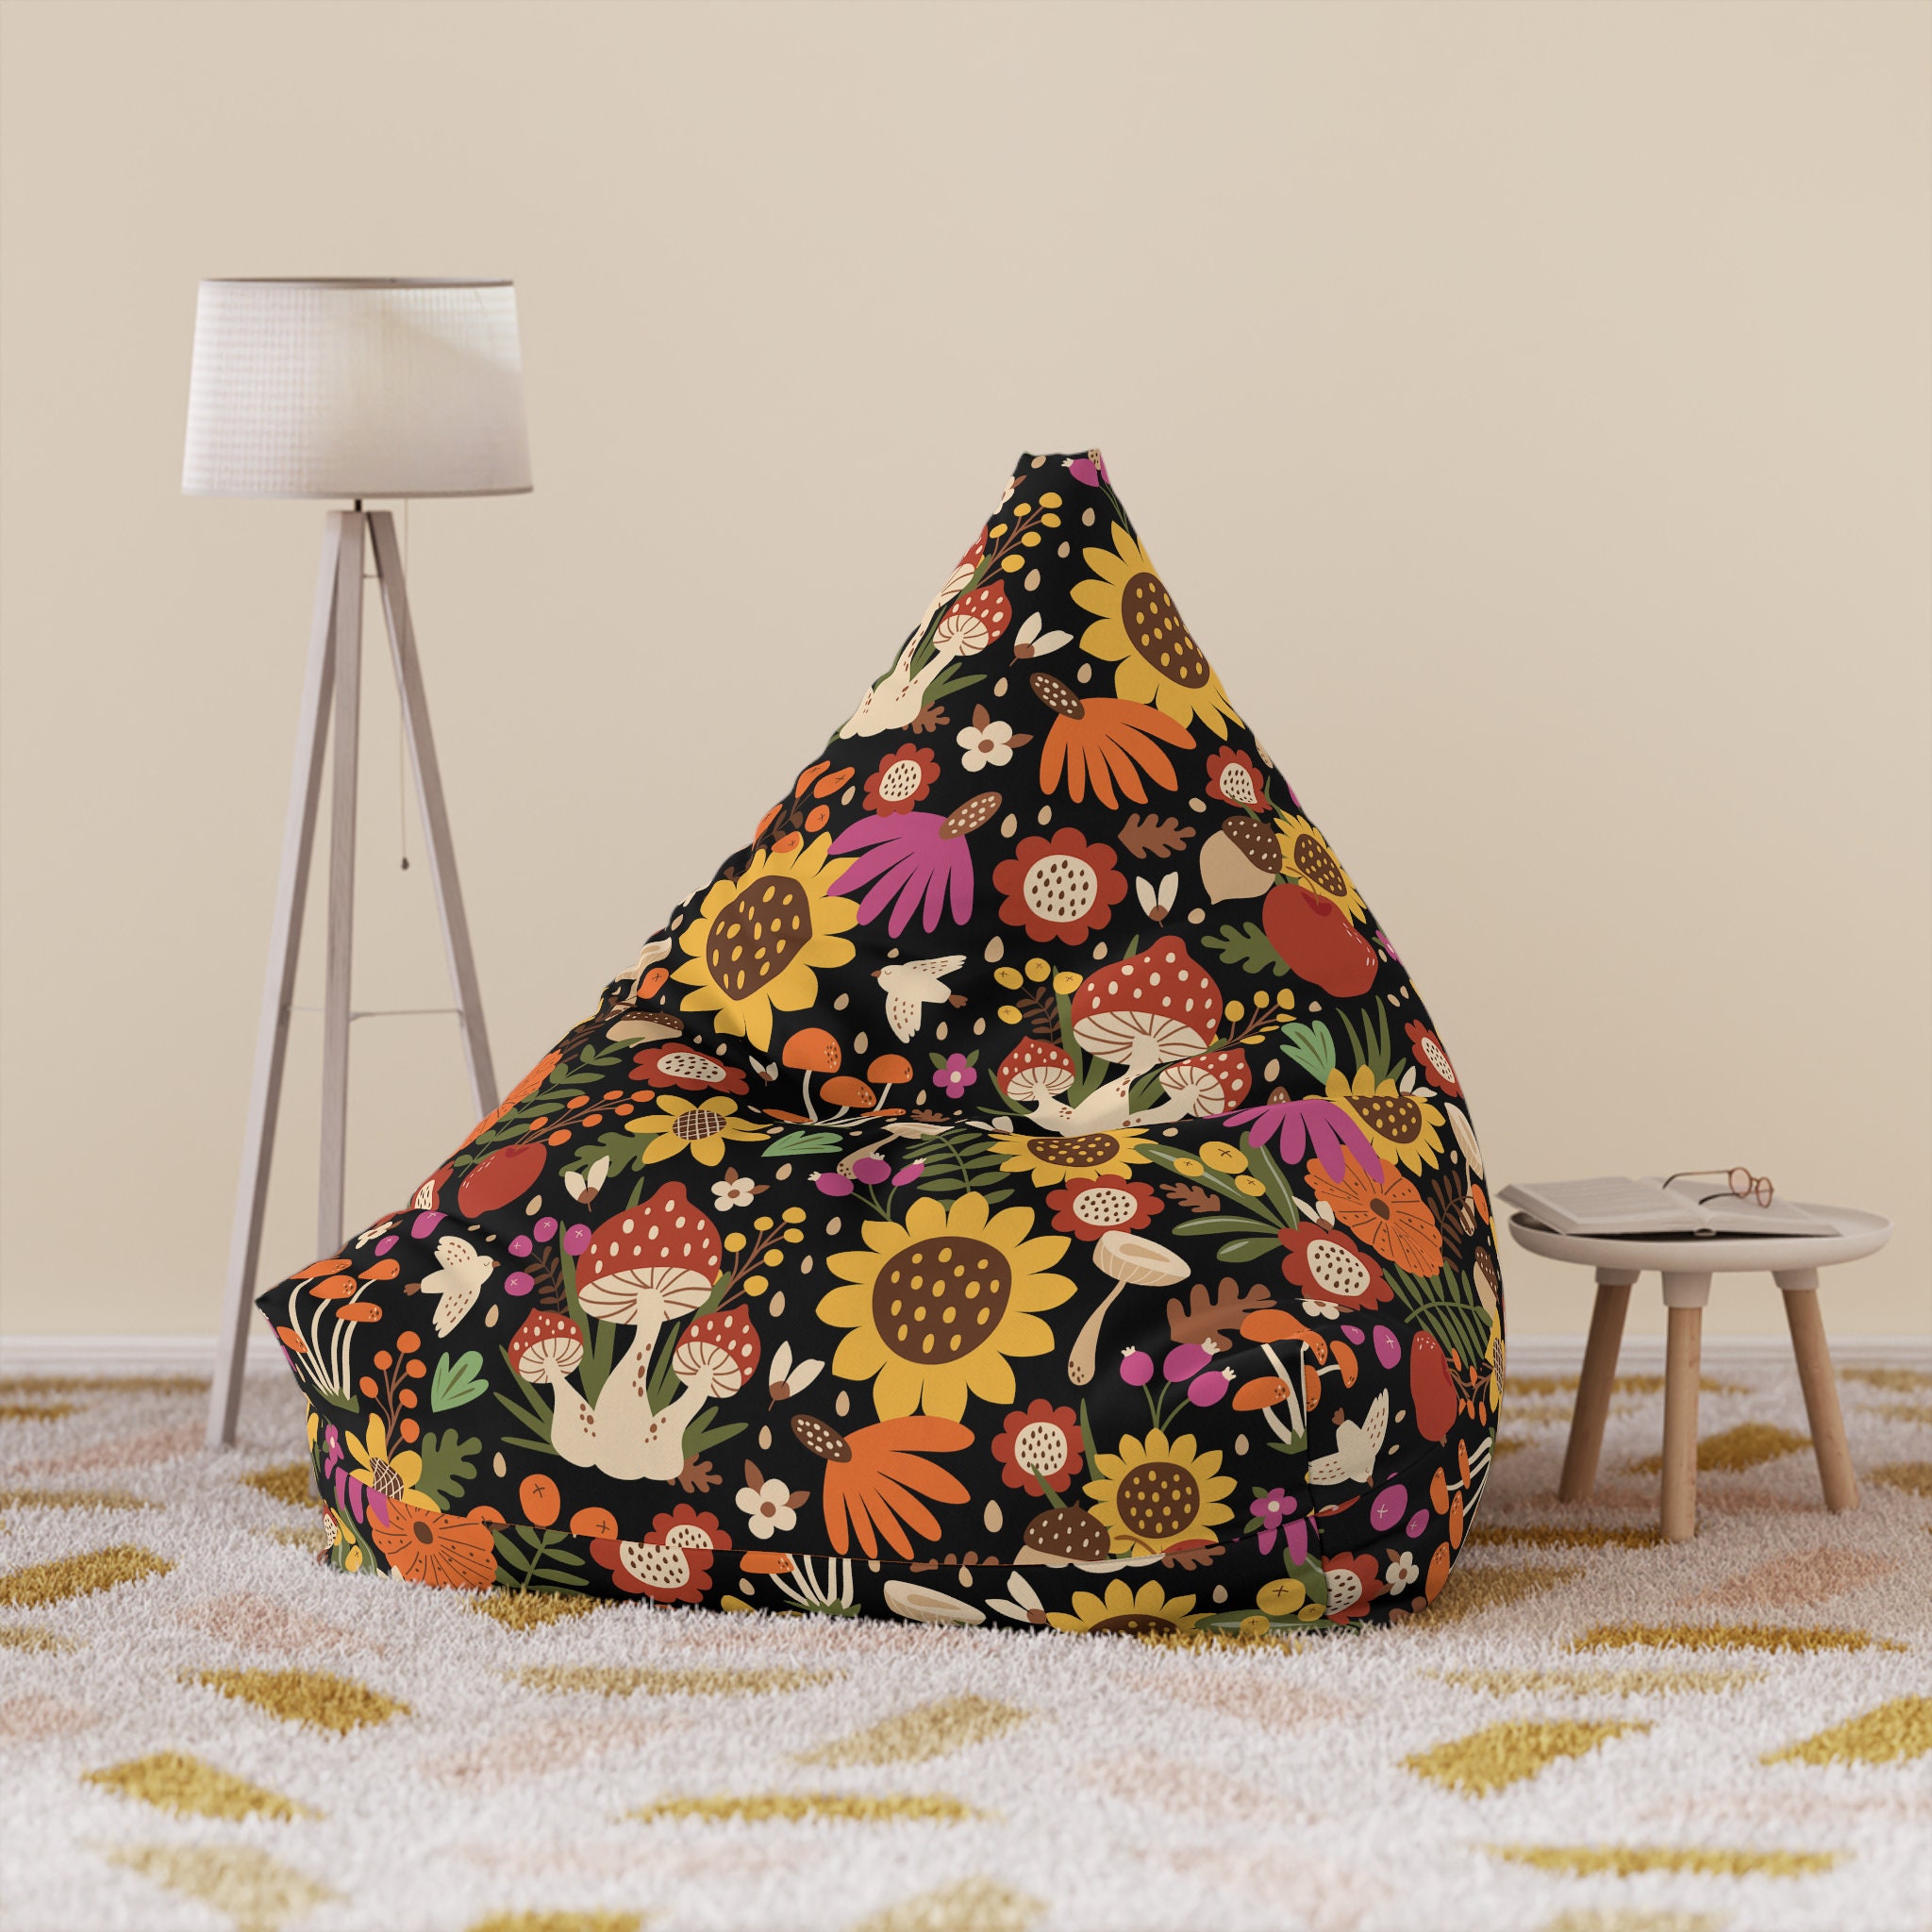 Bohemian Eclectic Floral Prints Bean Bag Chair With Cover Liner Unfilled -  Etsy